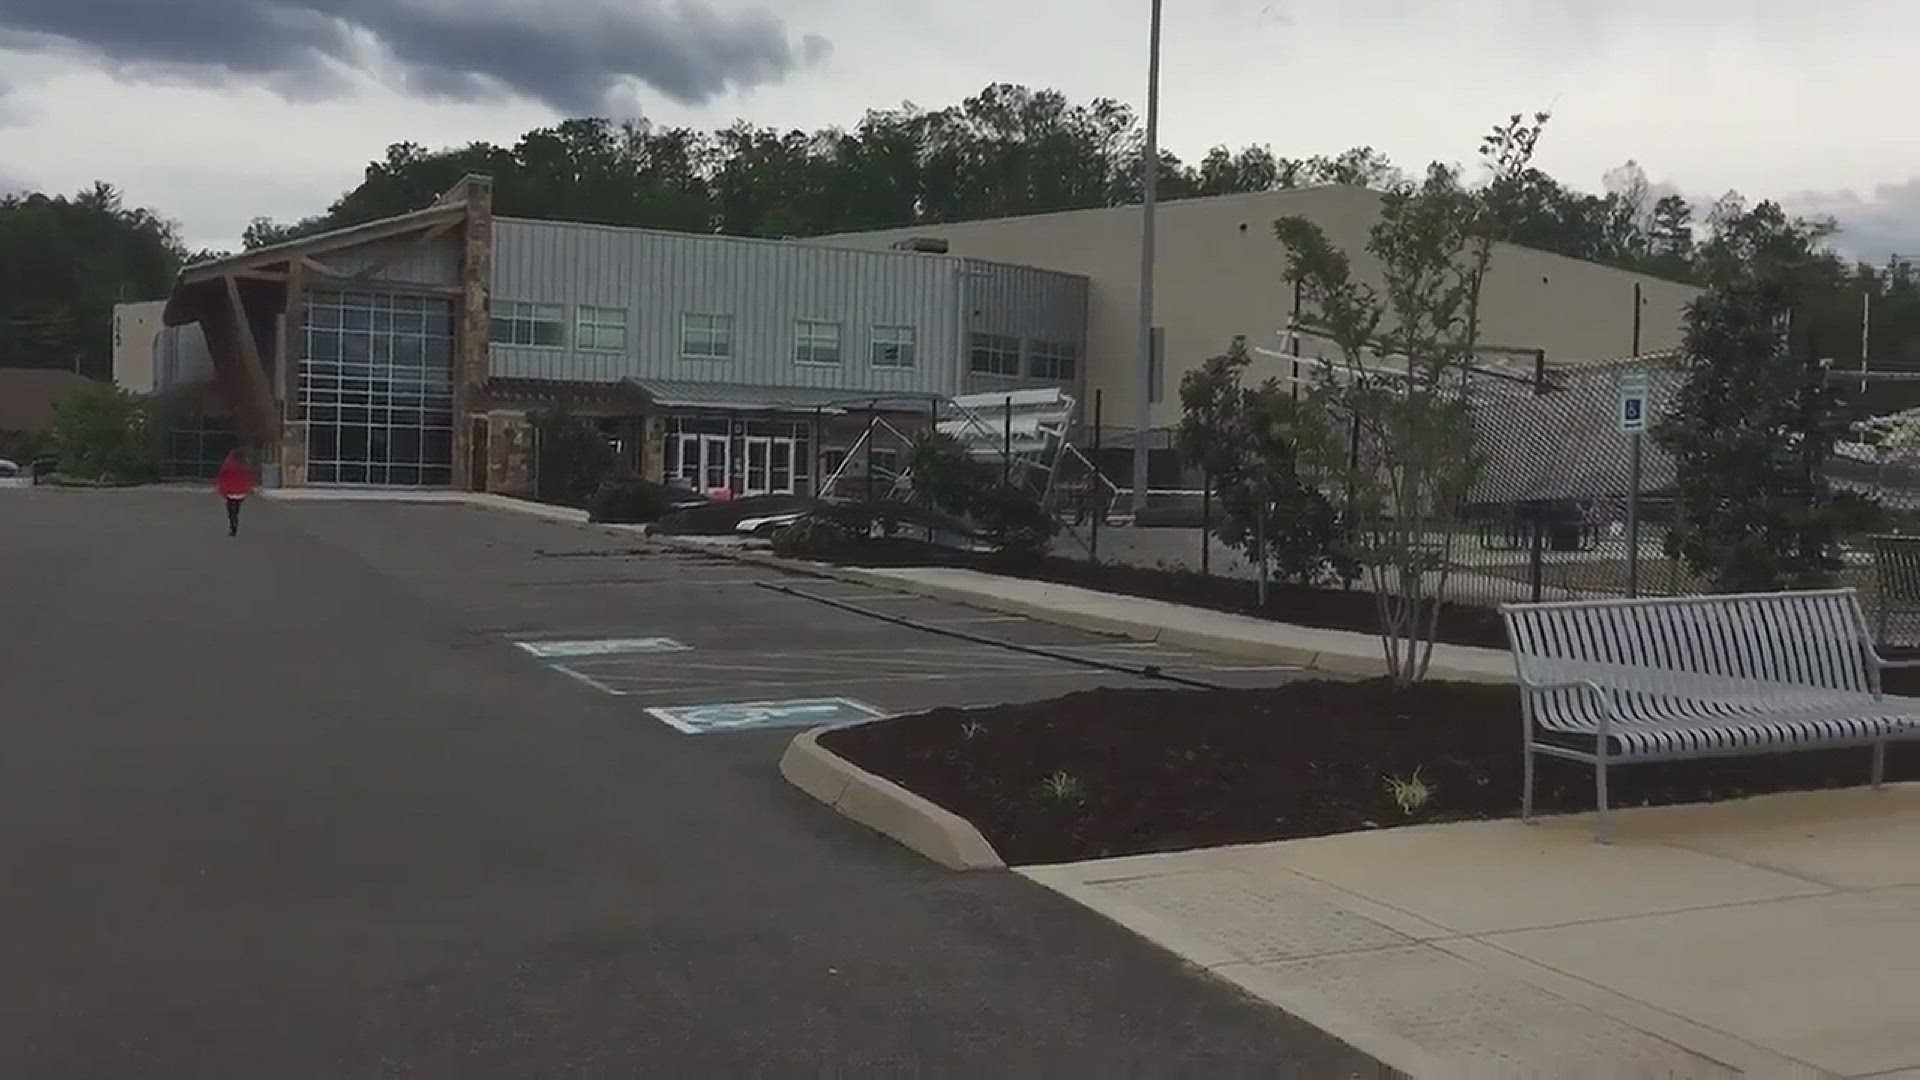 High winds in Gatlinburg caused damage at the Rocky Top Sports World complex